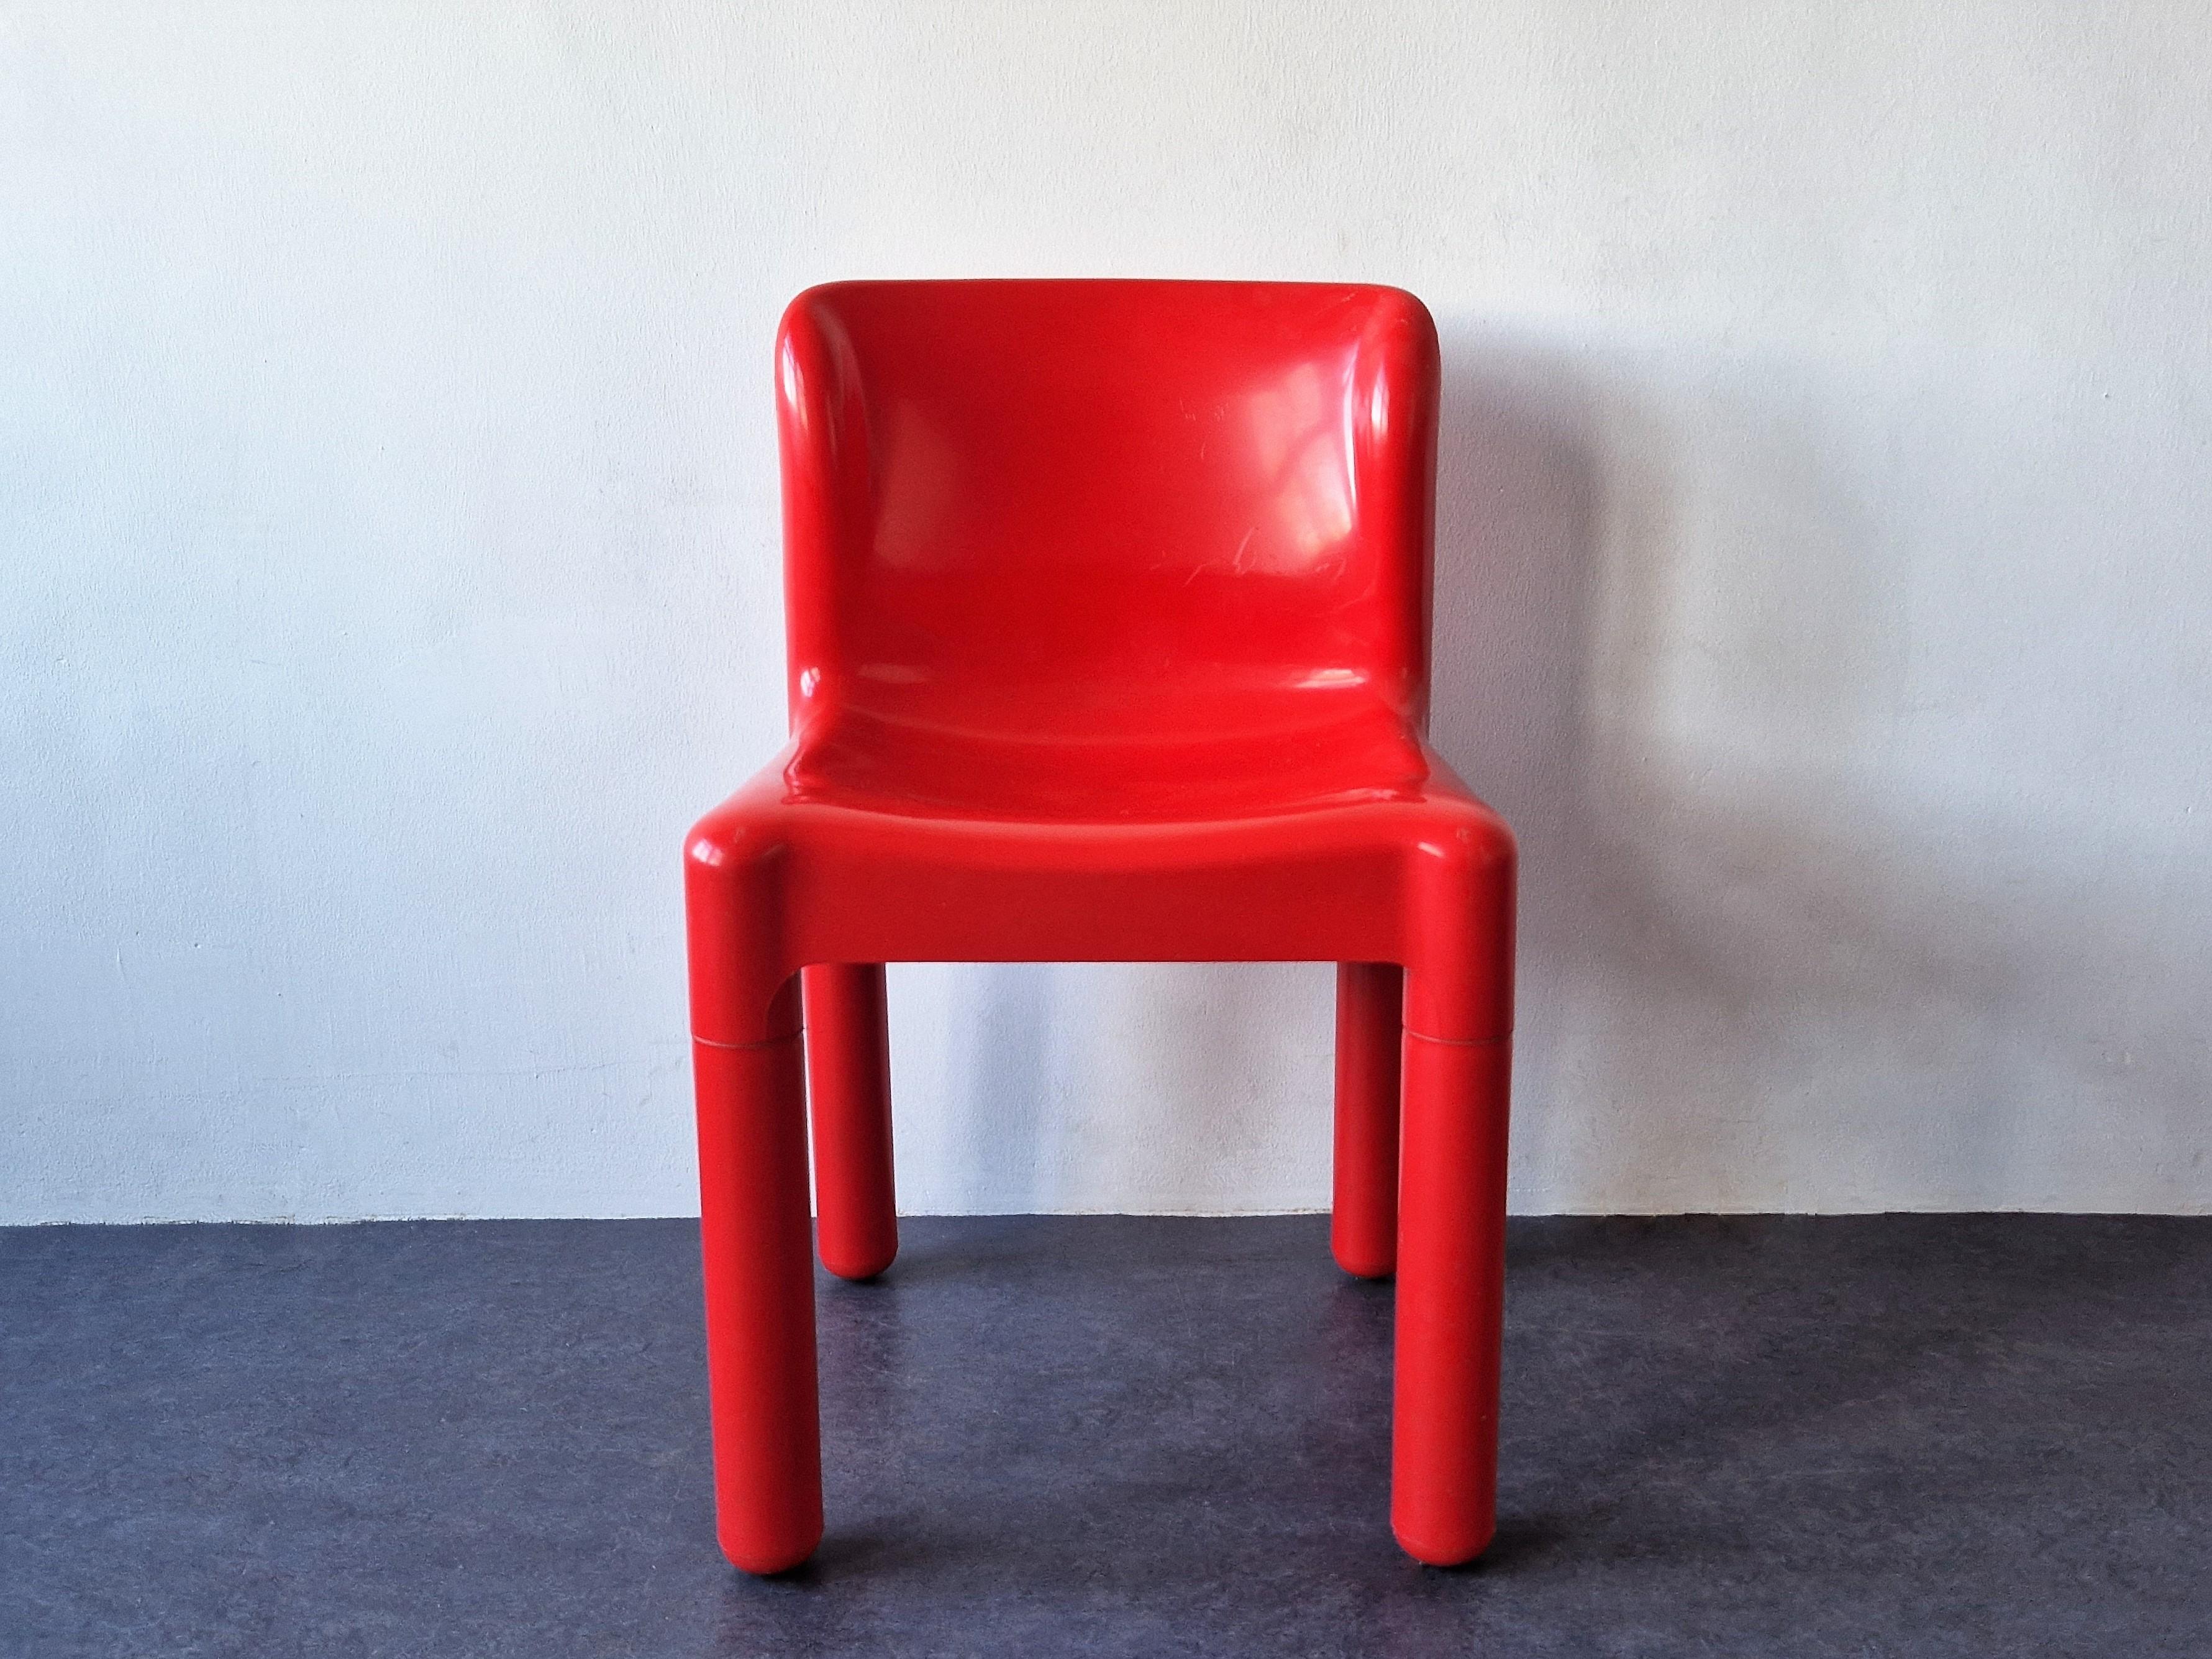 This chair, model 4875 was designed by Carlo Bartoli for Kartell in the early 1970's. It has a single seat-backrest unit with four screwable legs that made it the world’s first single polypropylene seat piece to be injection moulded. This chair was